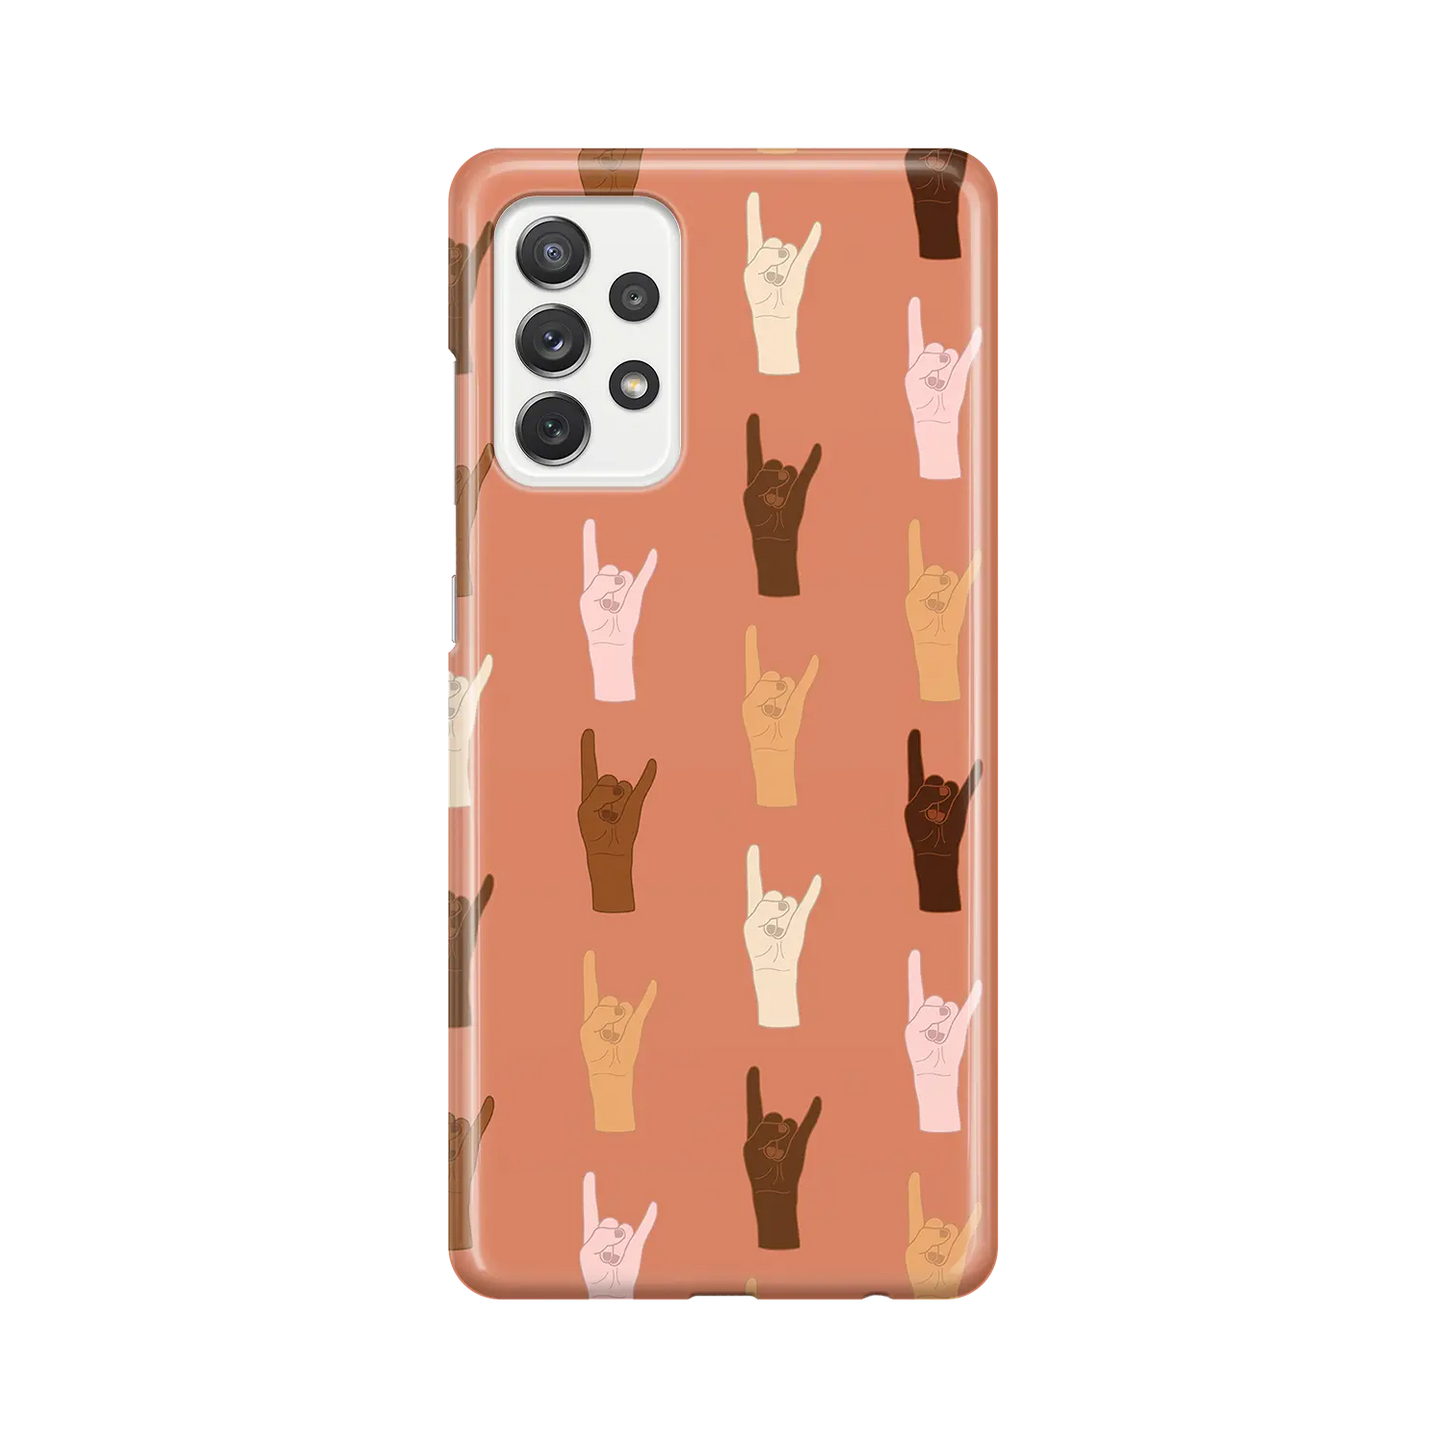 Hands of the World - Personalised Galaxy A Case